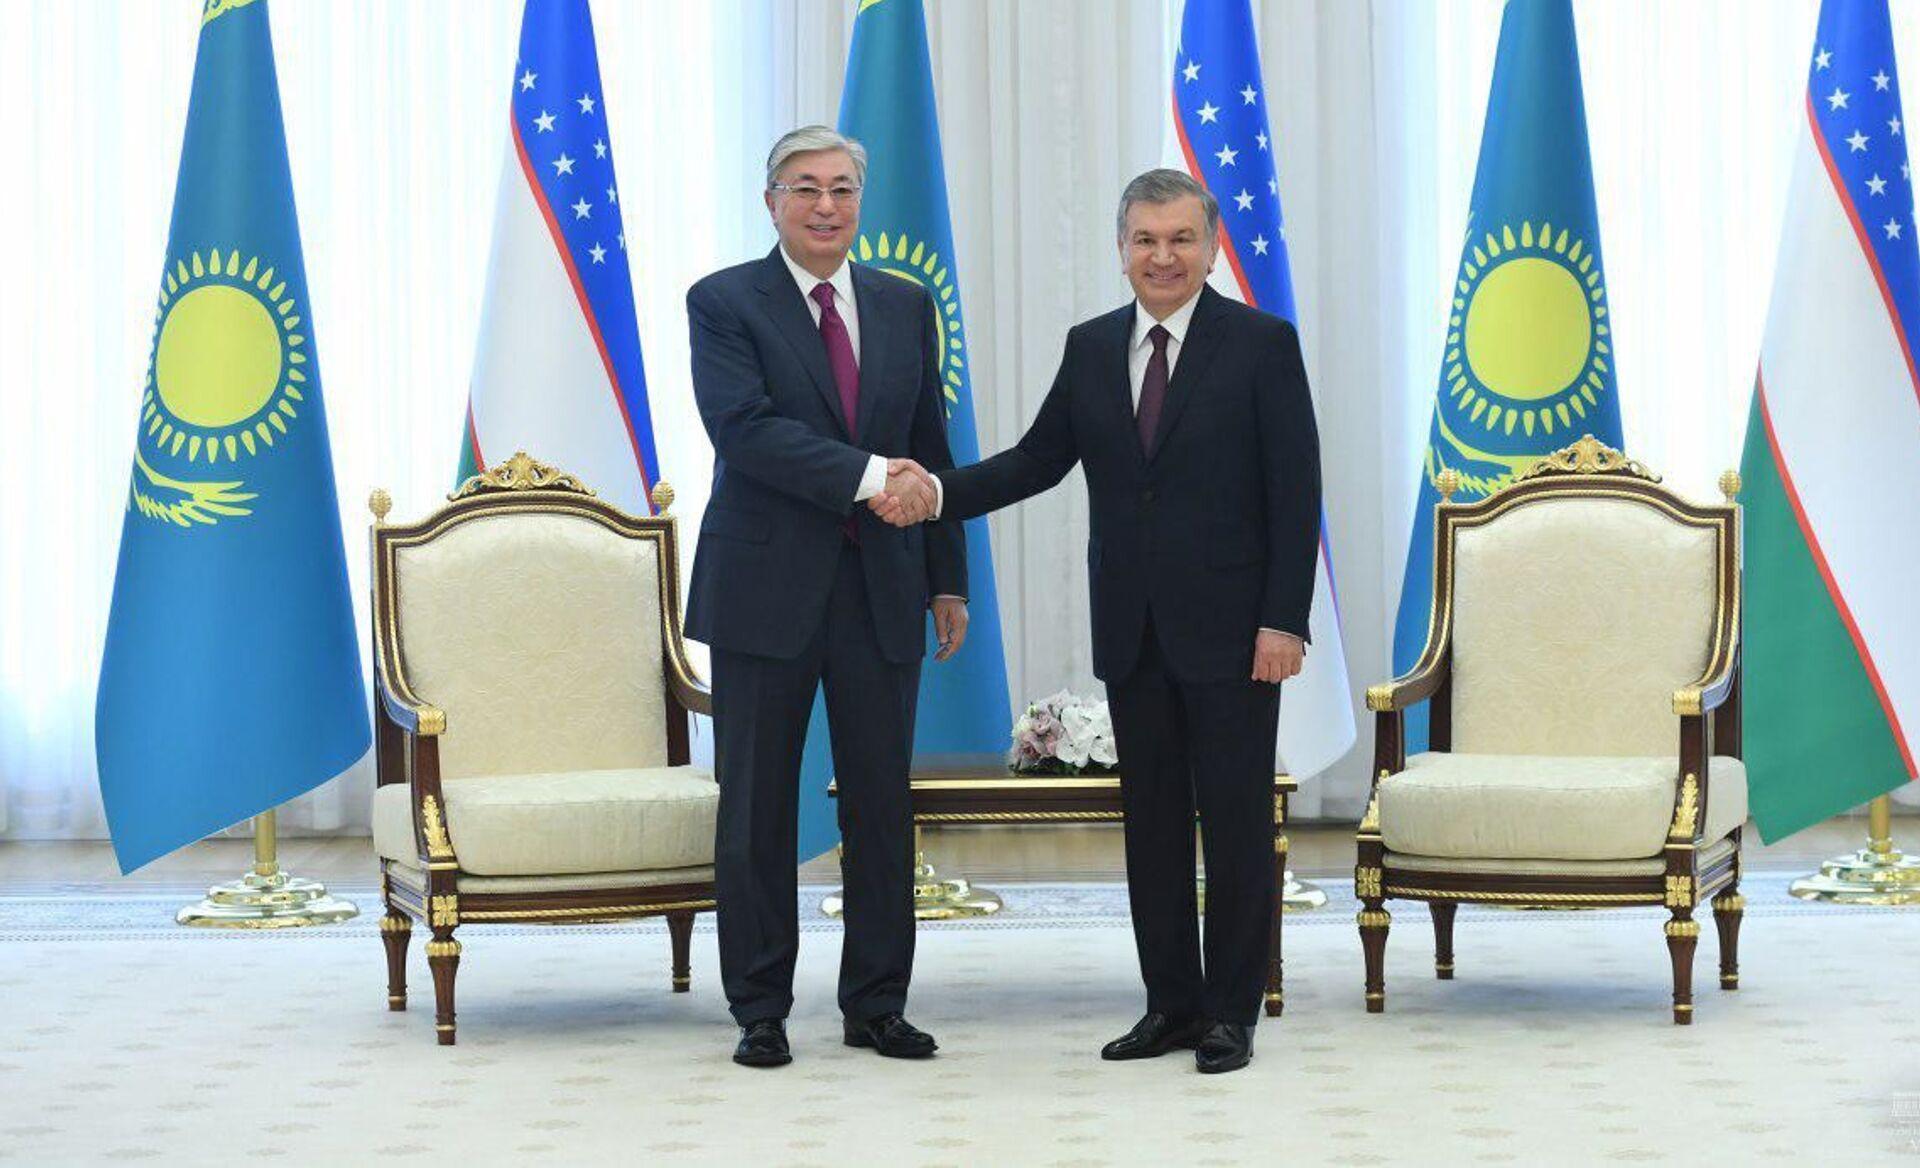 The Presidents of Uzbekistan and Kazakhstan discussed current issues of practical cooperation